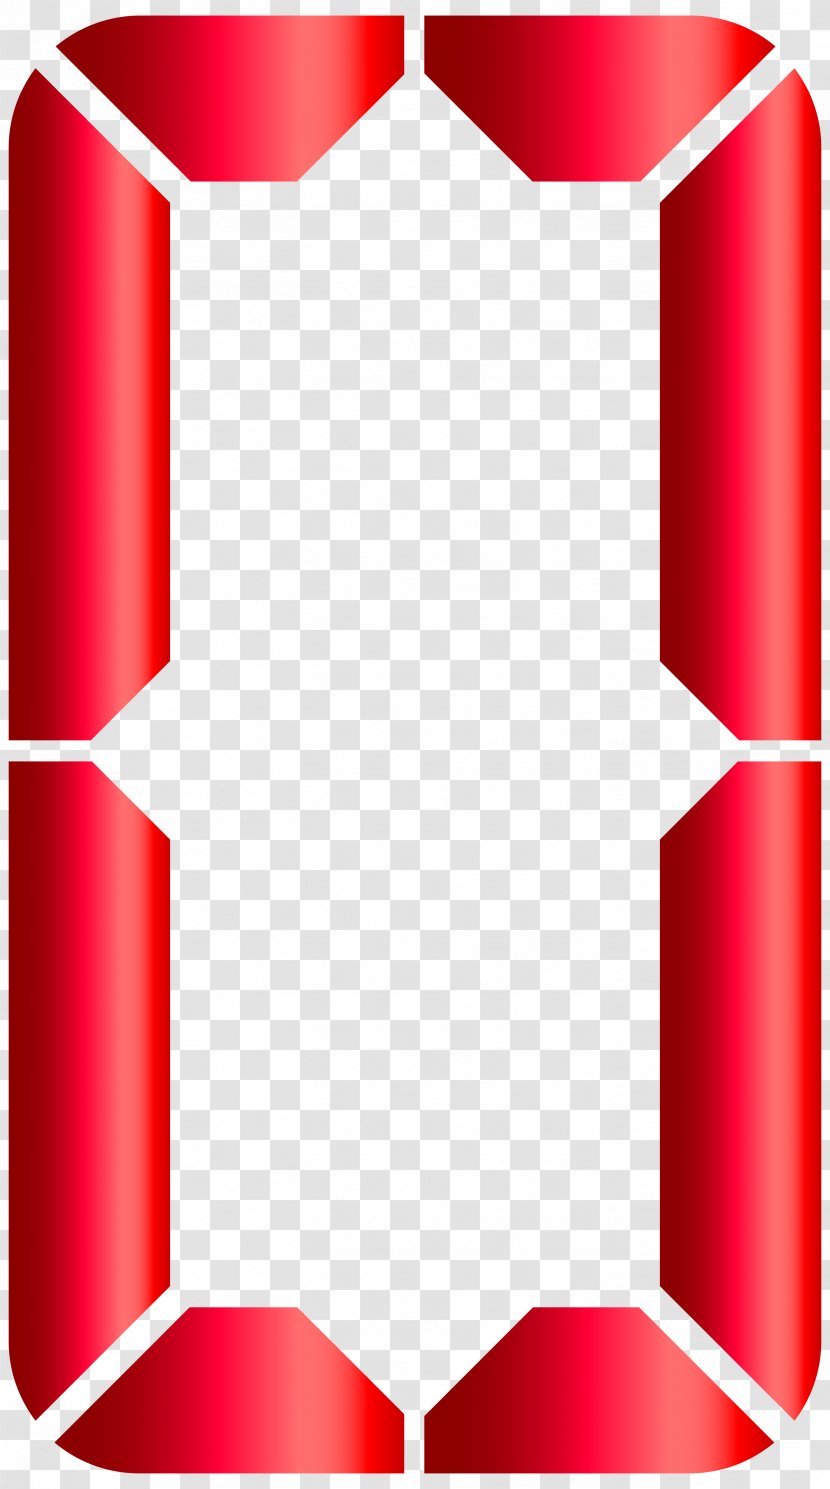 Red Angle Pattern - Number Zero Digital Style Clip Art Image Transparent PNG